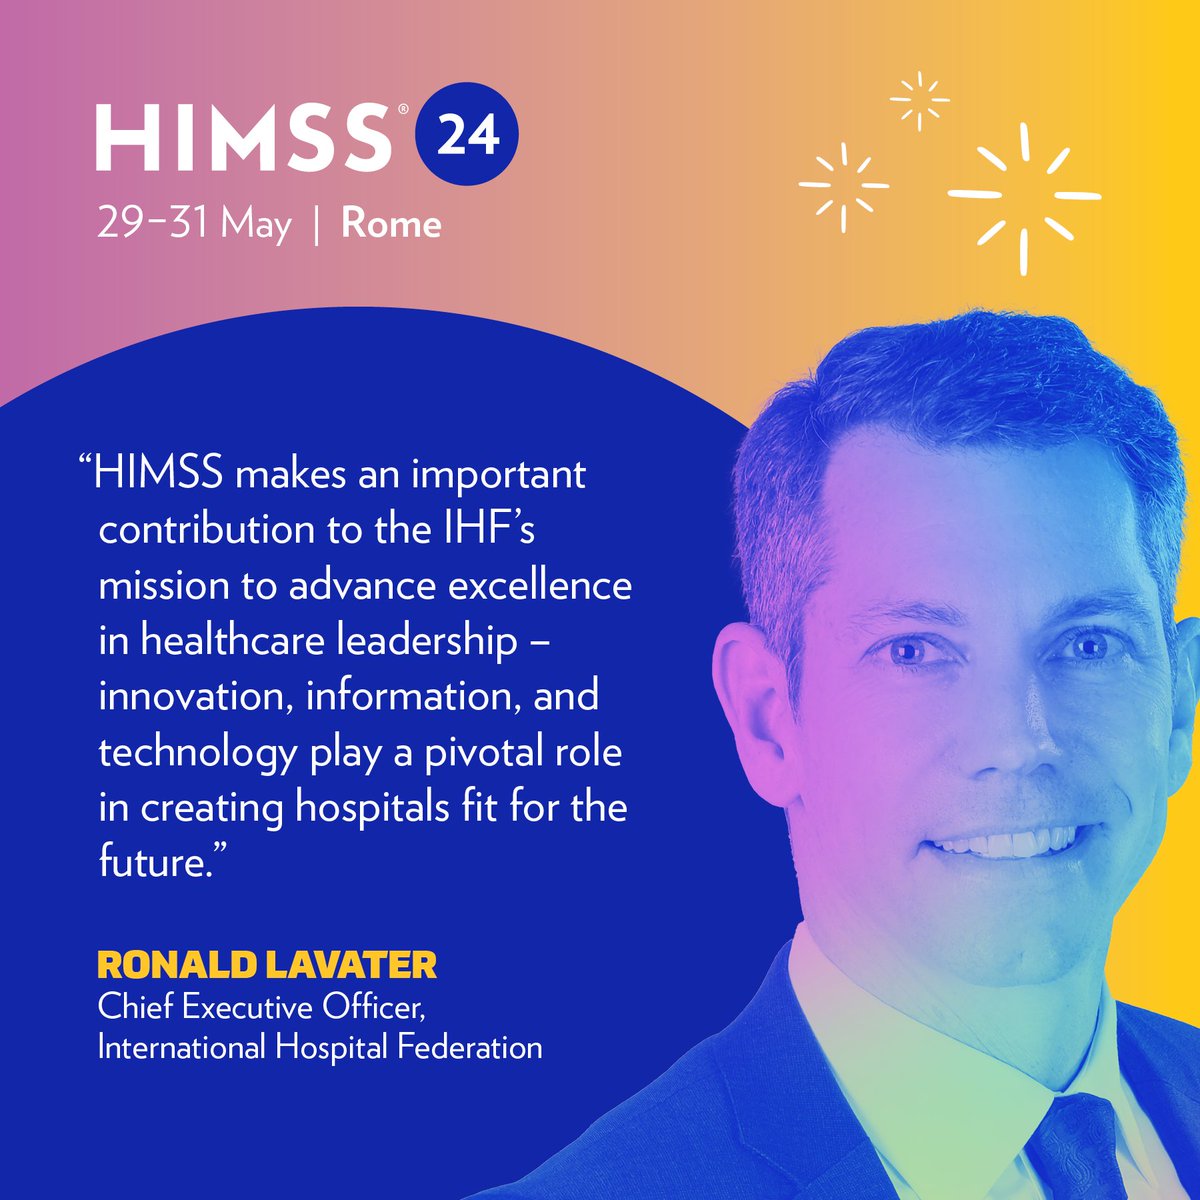 'Innovation, information, and technology play a pivotal role in creating hospitals fit for the future.” We couldn't agree more! 🎯 We're thrilled to be partnering with @IHF_FIH at #HIMSS24Europe. This collaboration fuels the future of healthcare. 💪